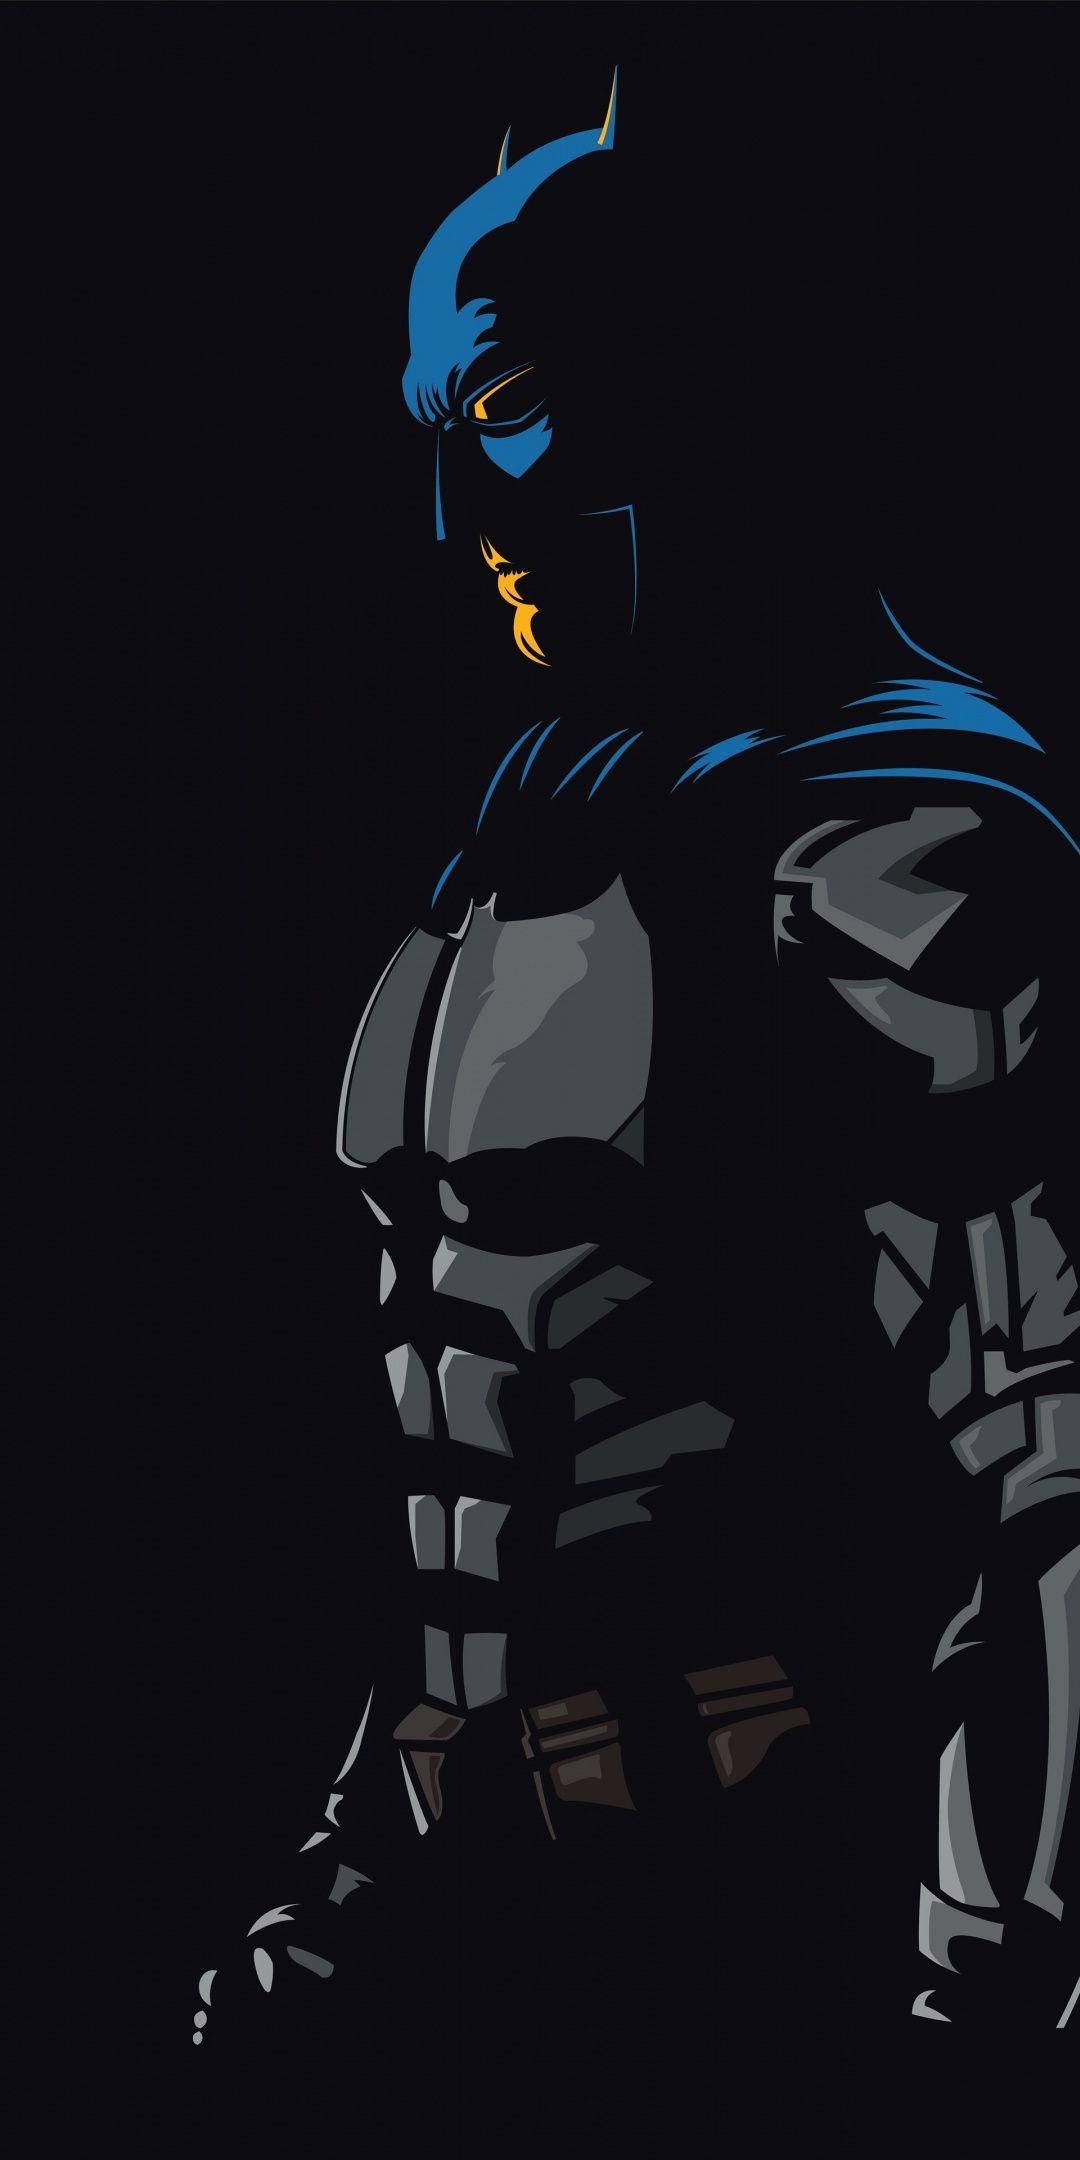 batman wallpaper hd for iphone and android - image #3434958 on